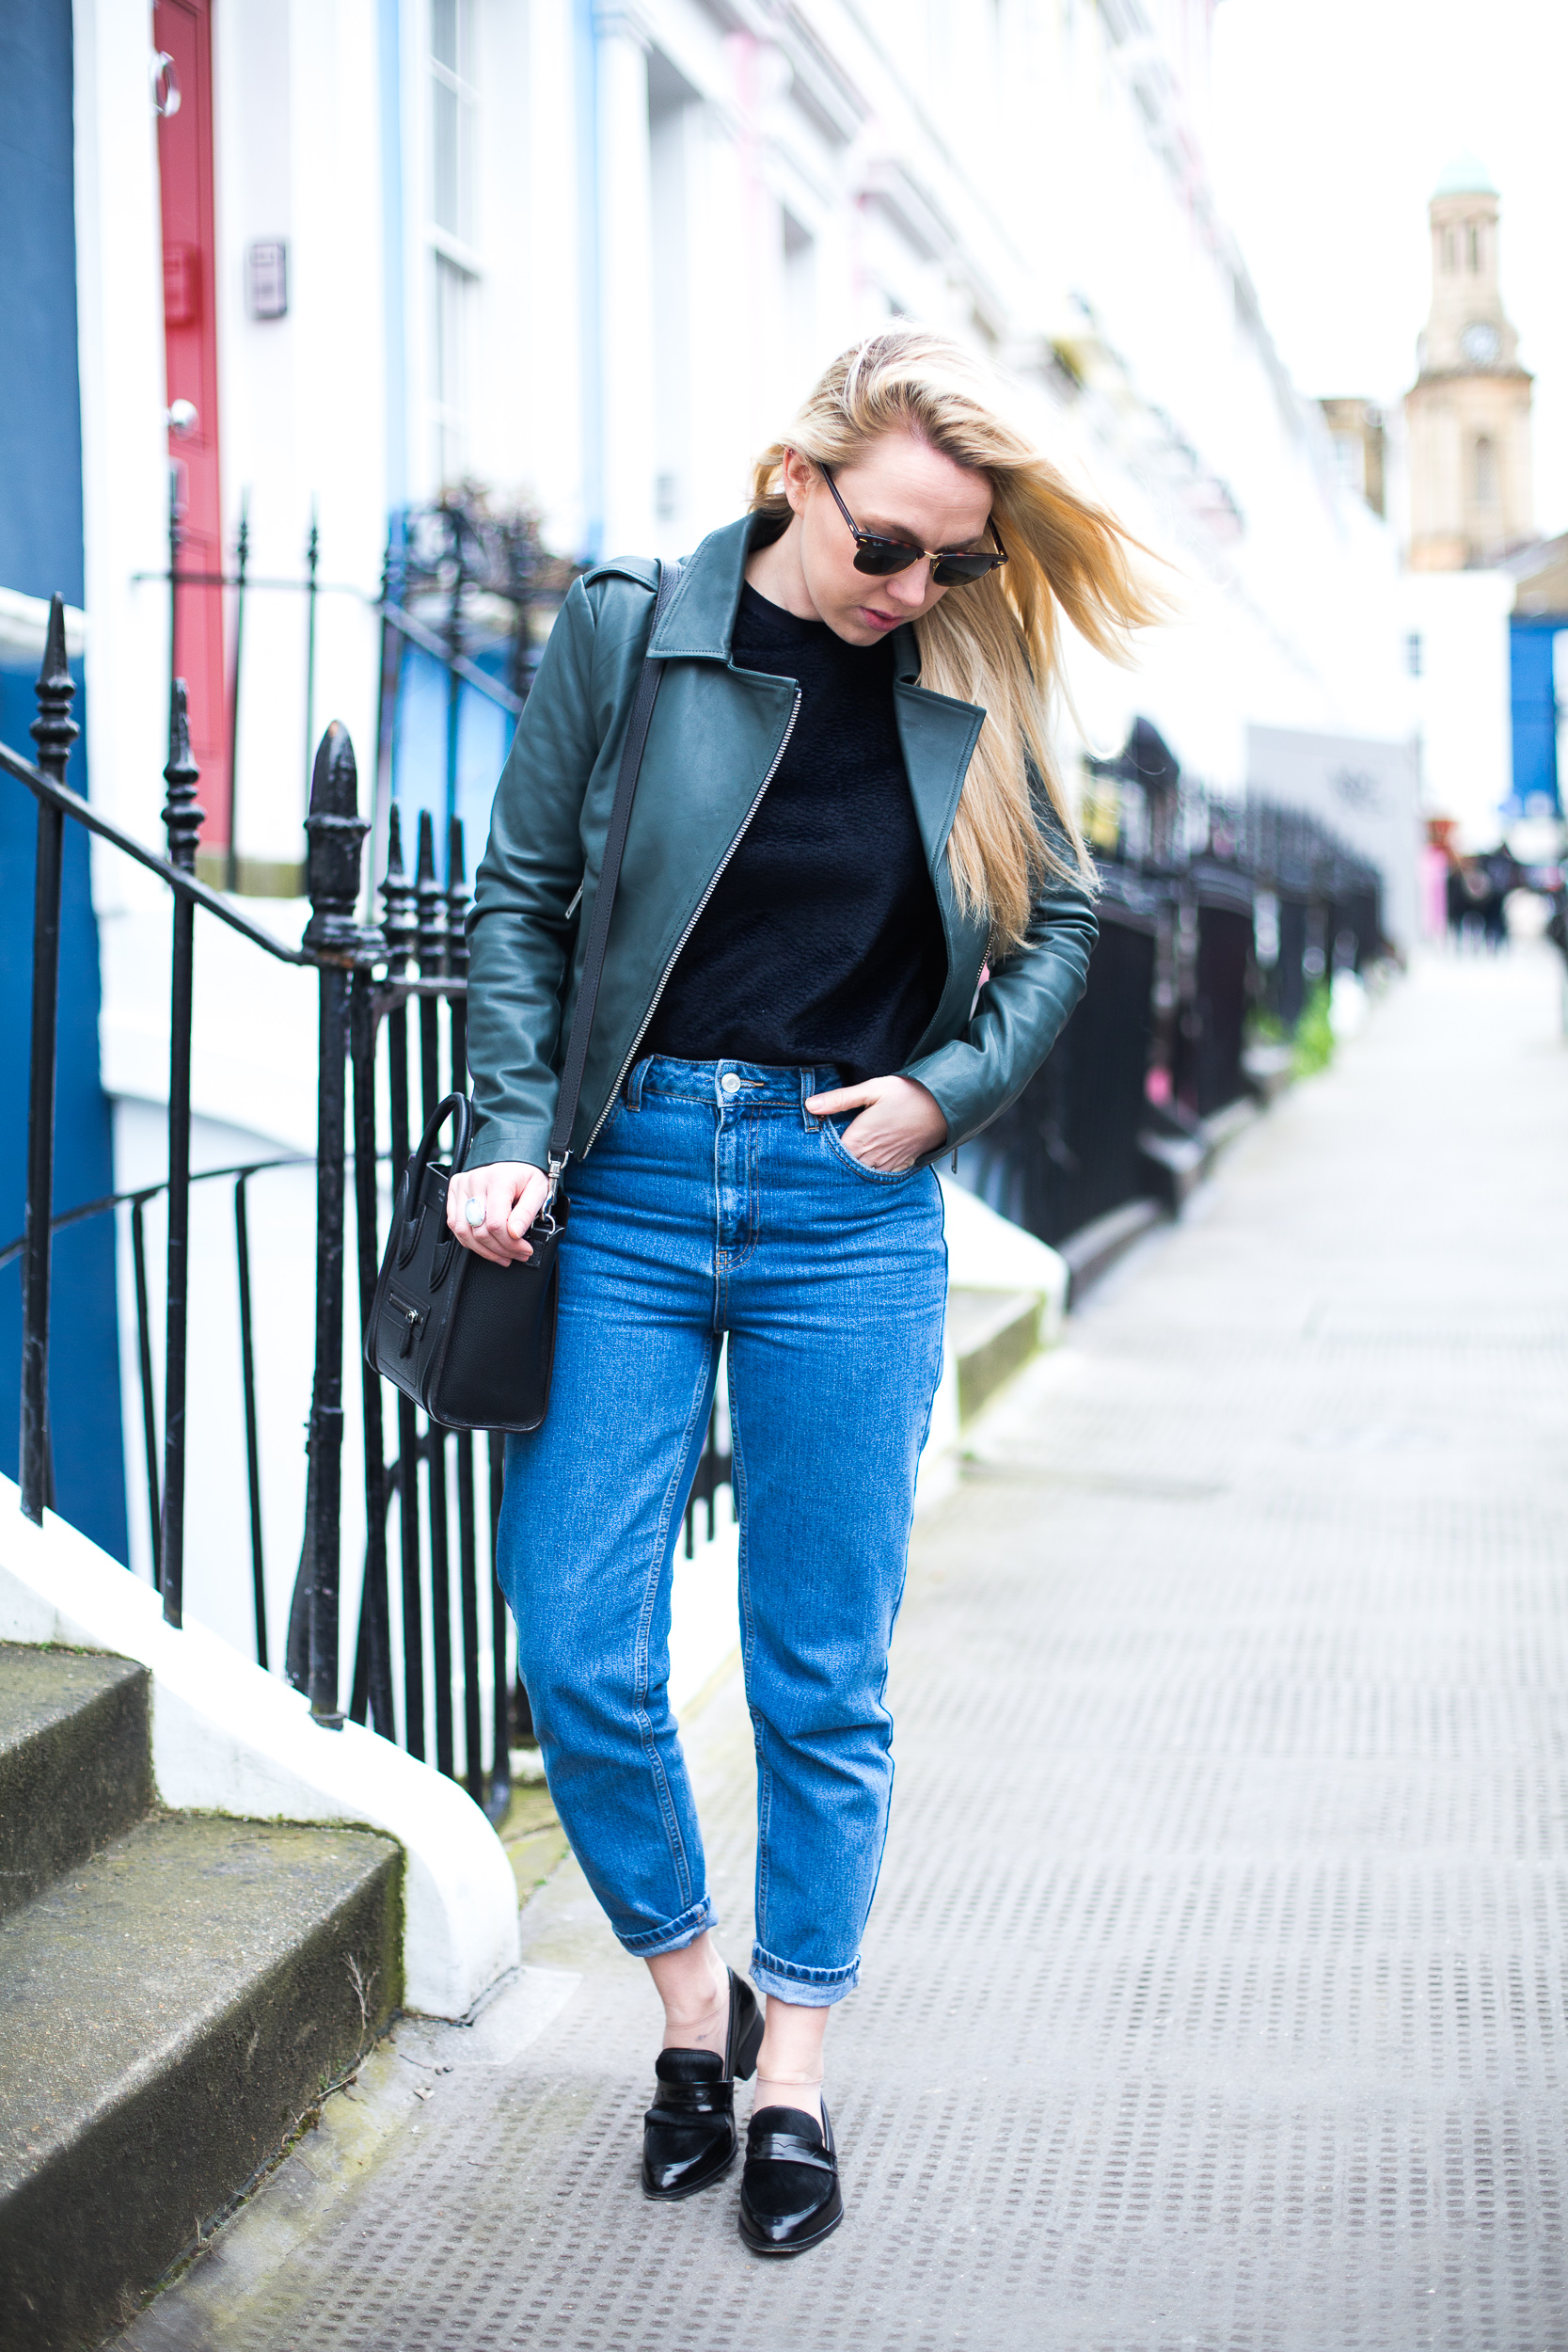 Black Leather Jacket With Blue Jeans And Heels Pictures, Photos, and Images  for Facebook, Tumblr, Pinterest, and T… | Classy winter outfits, Womens  fashion, Fashion